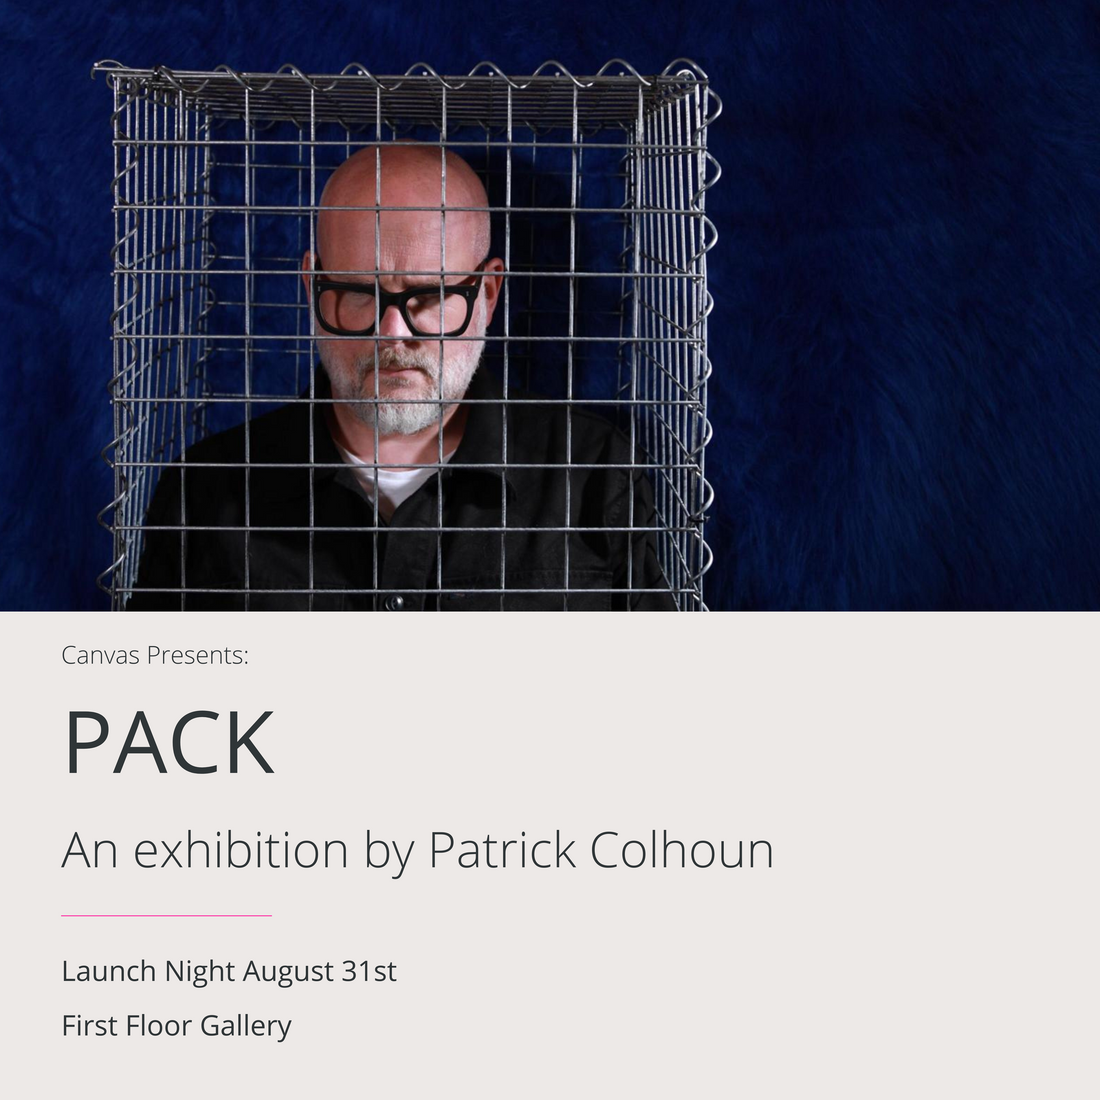 Canvas Presents: PACK by Patrick Colhoun